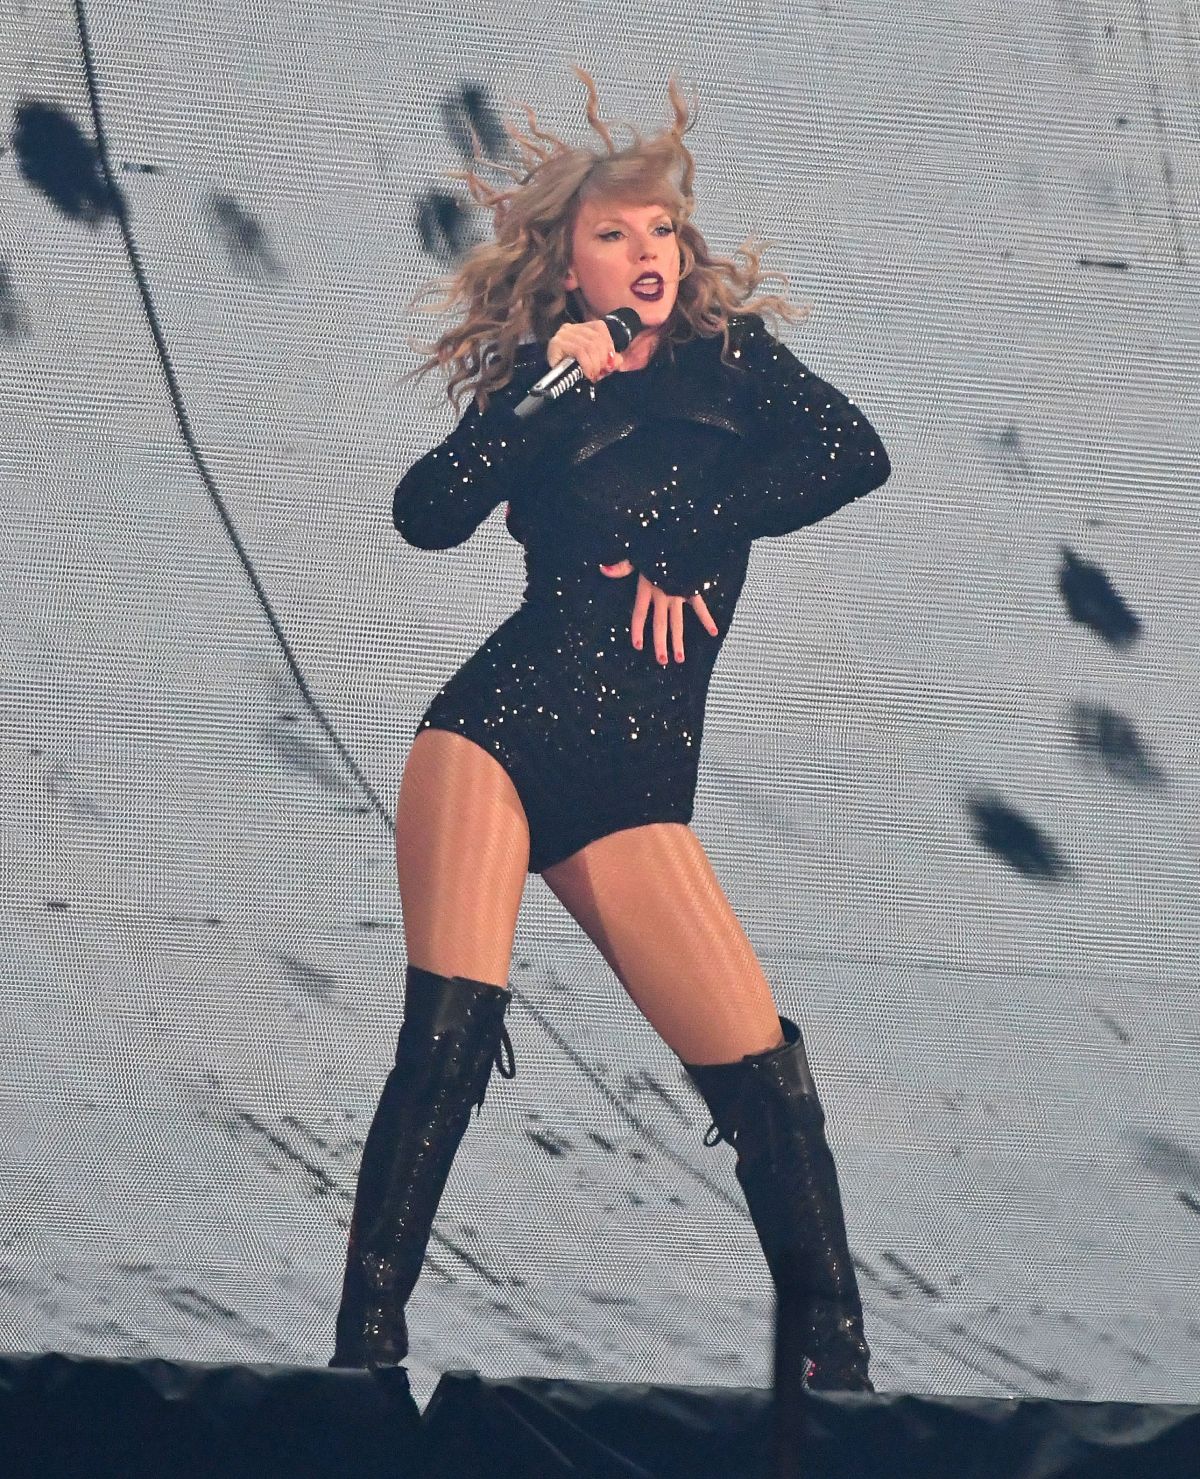 taylor-swift-performs-at-her-reputation-tour-in-detroit-08-28-2018-6.jpg